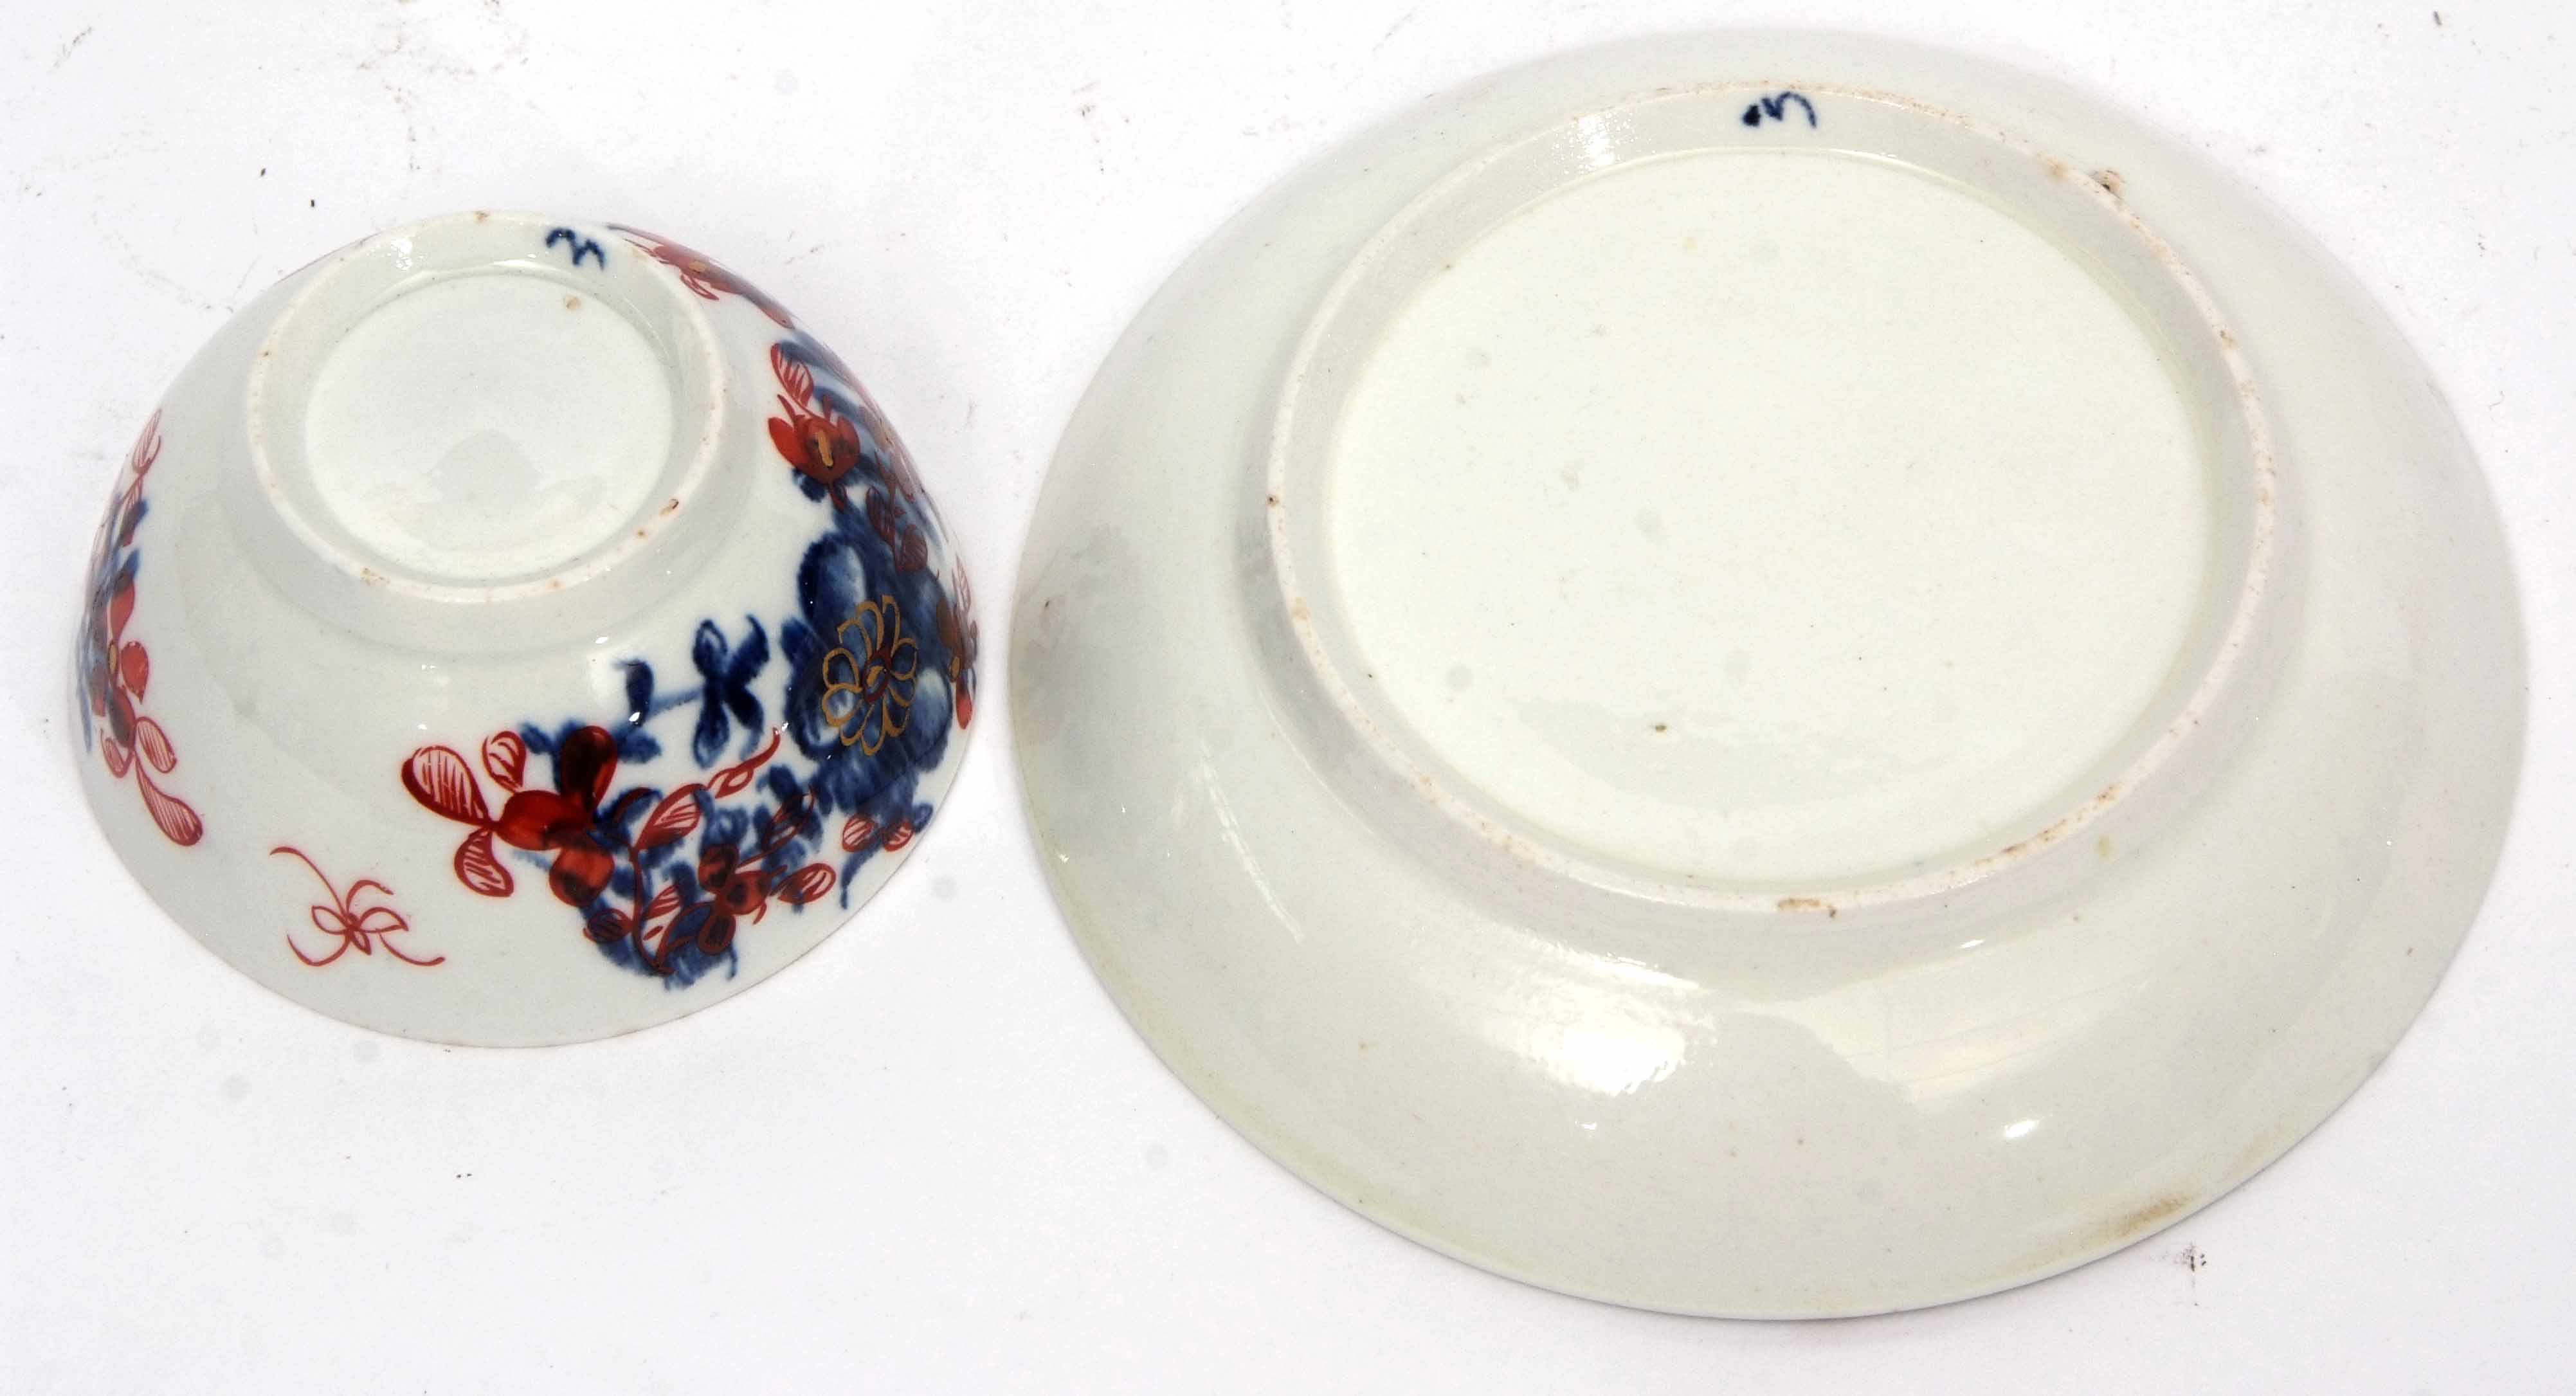 Lowestoft porcelain tea bowl and saucer circa 1780, the blue and white design clobbered with a - Image 3 of 4